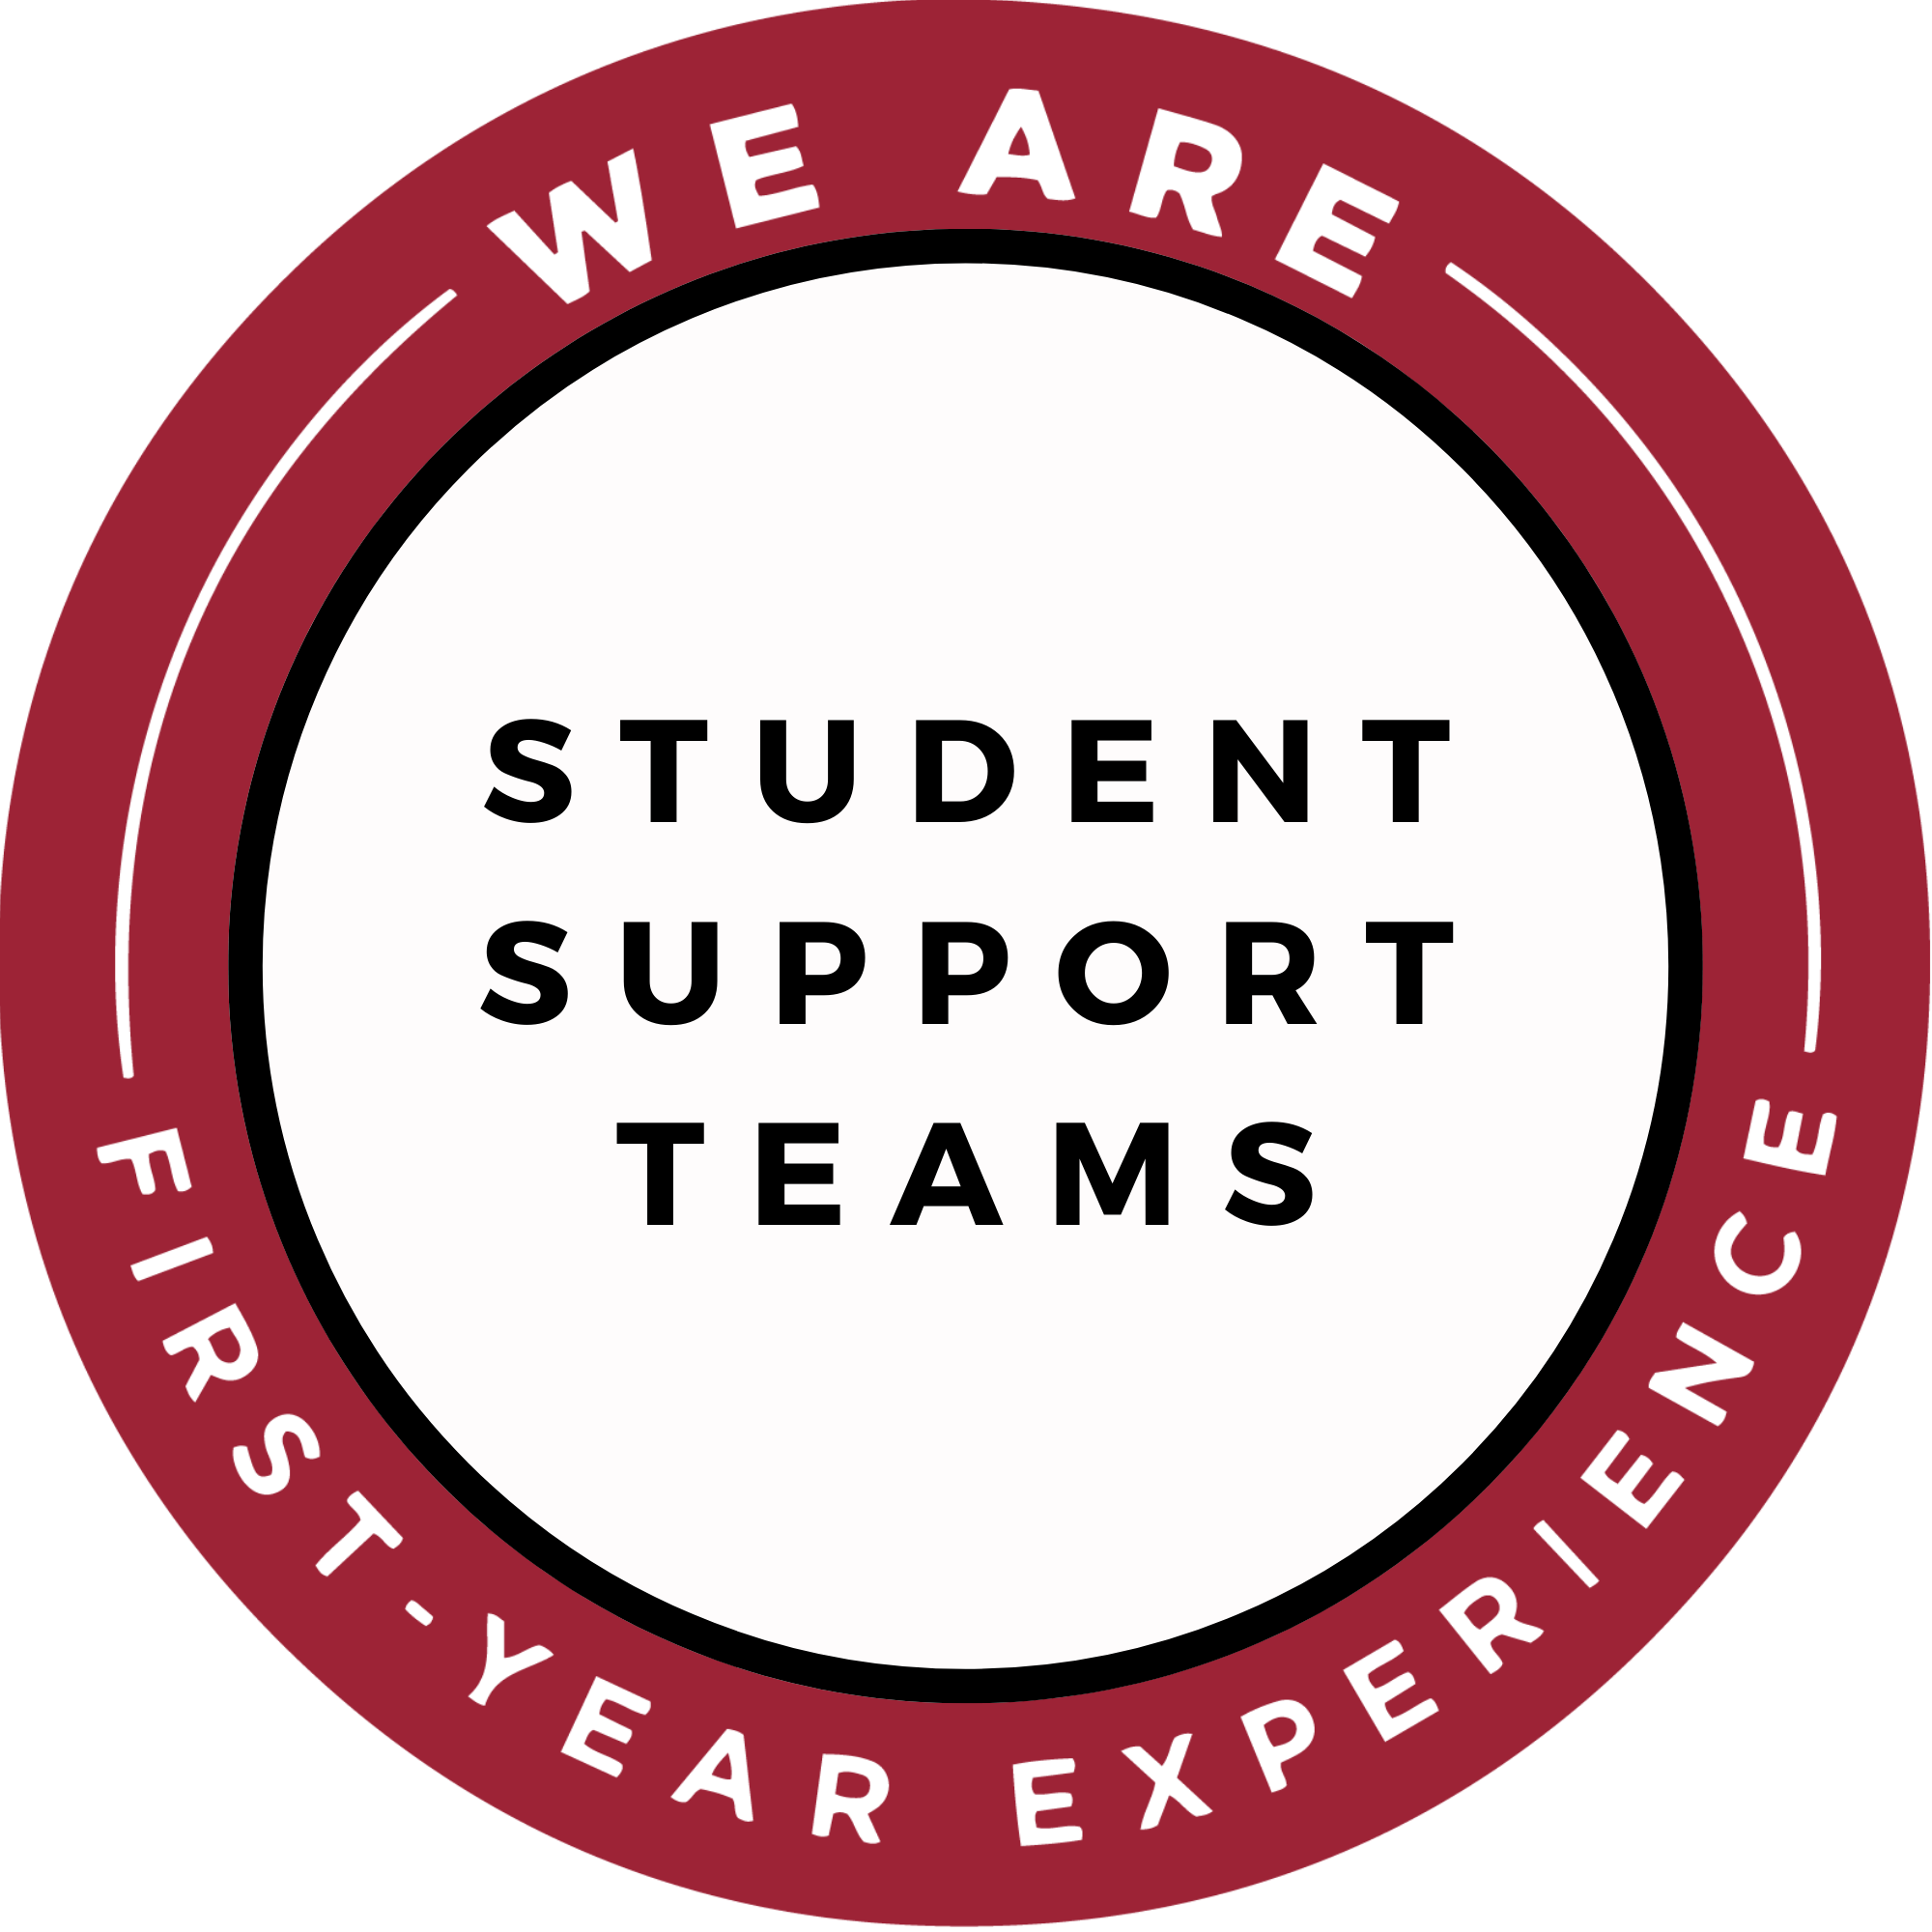 Student Support Teams round logo